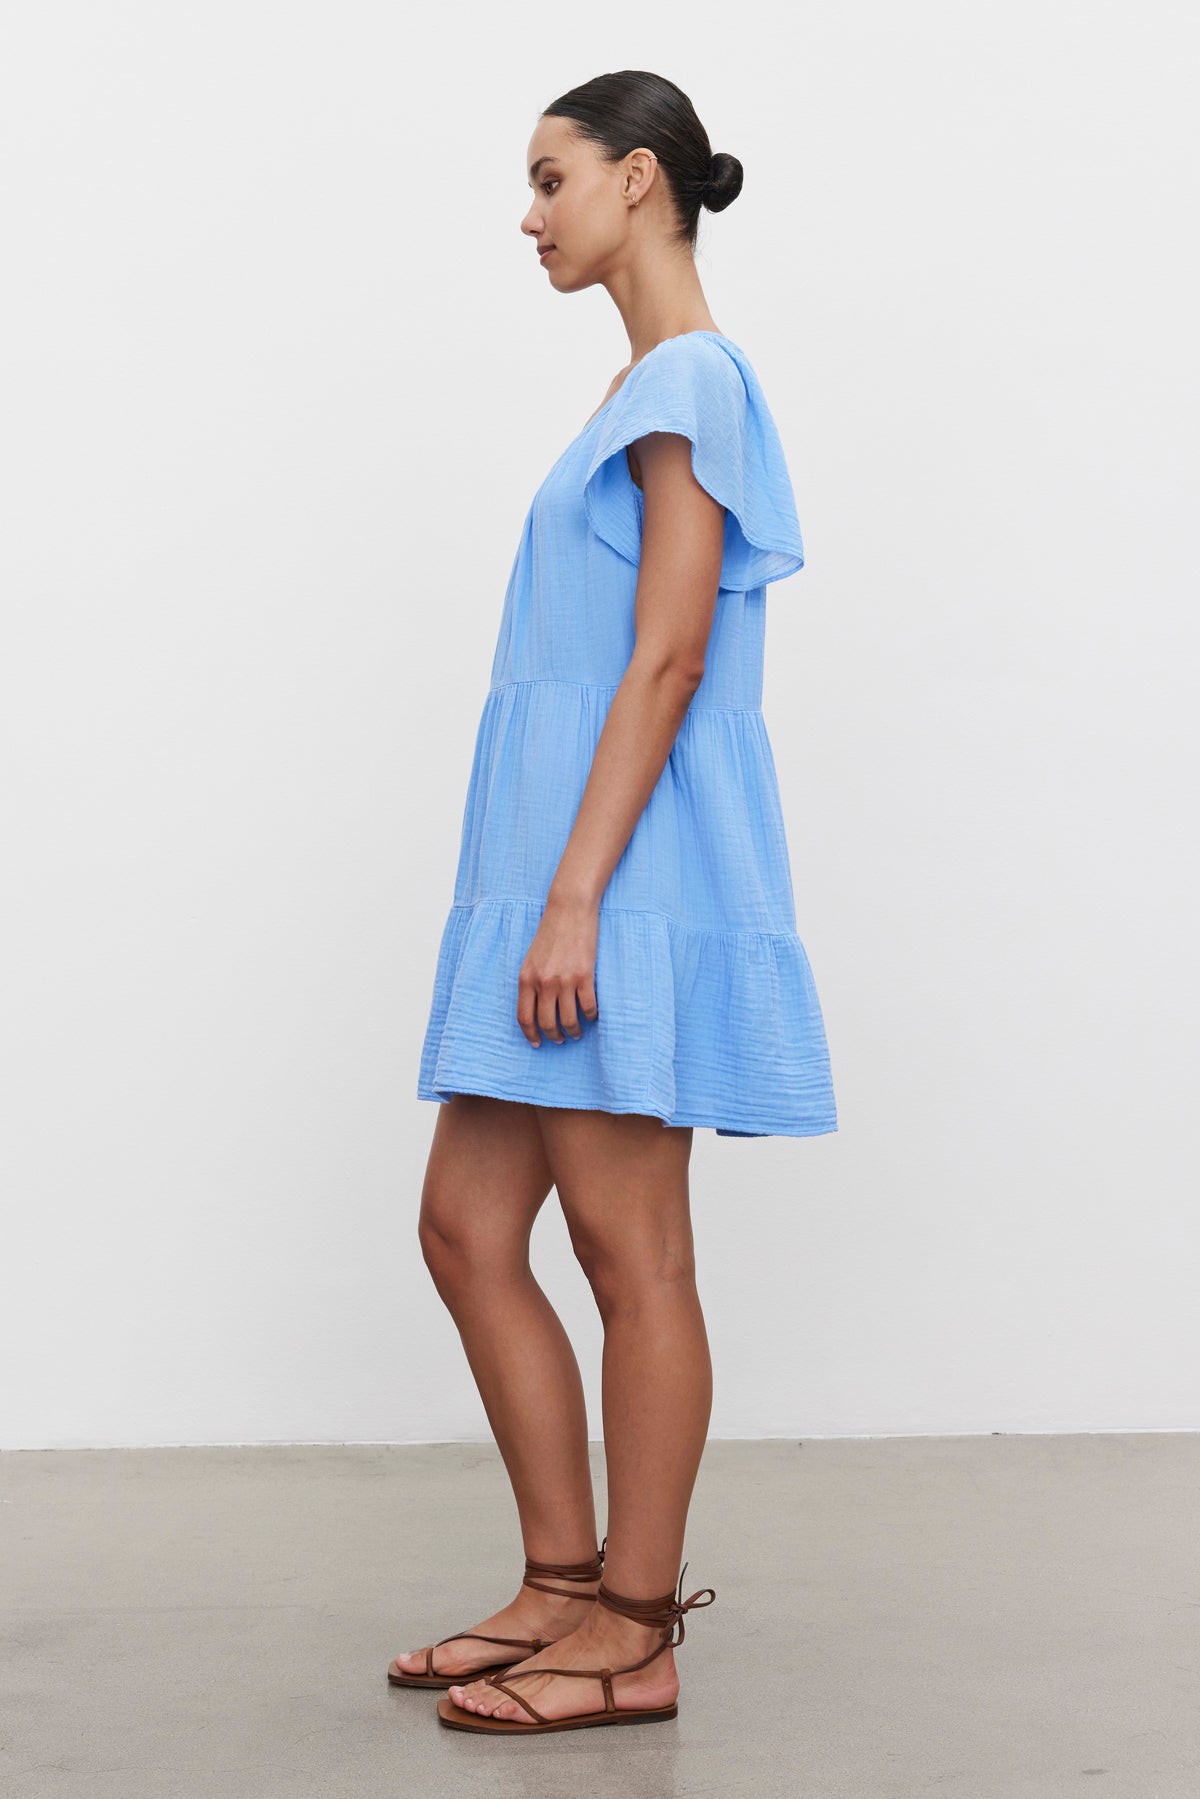 Woman in a blue Velvet by Graham & Spencer ELEANOR COTTON GAUZE TIERED DRESS and brown sandals standing sideways against a white background.-36443480391873